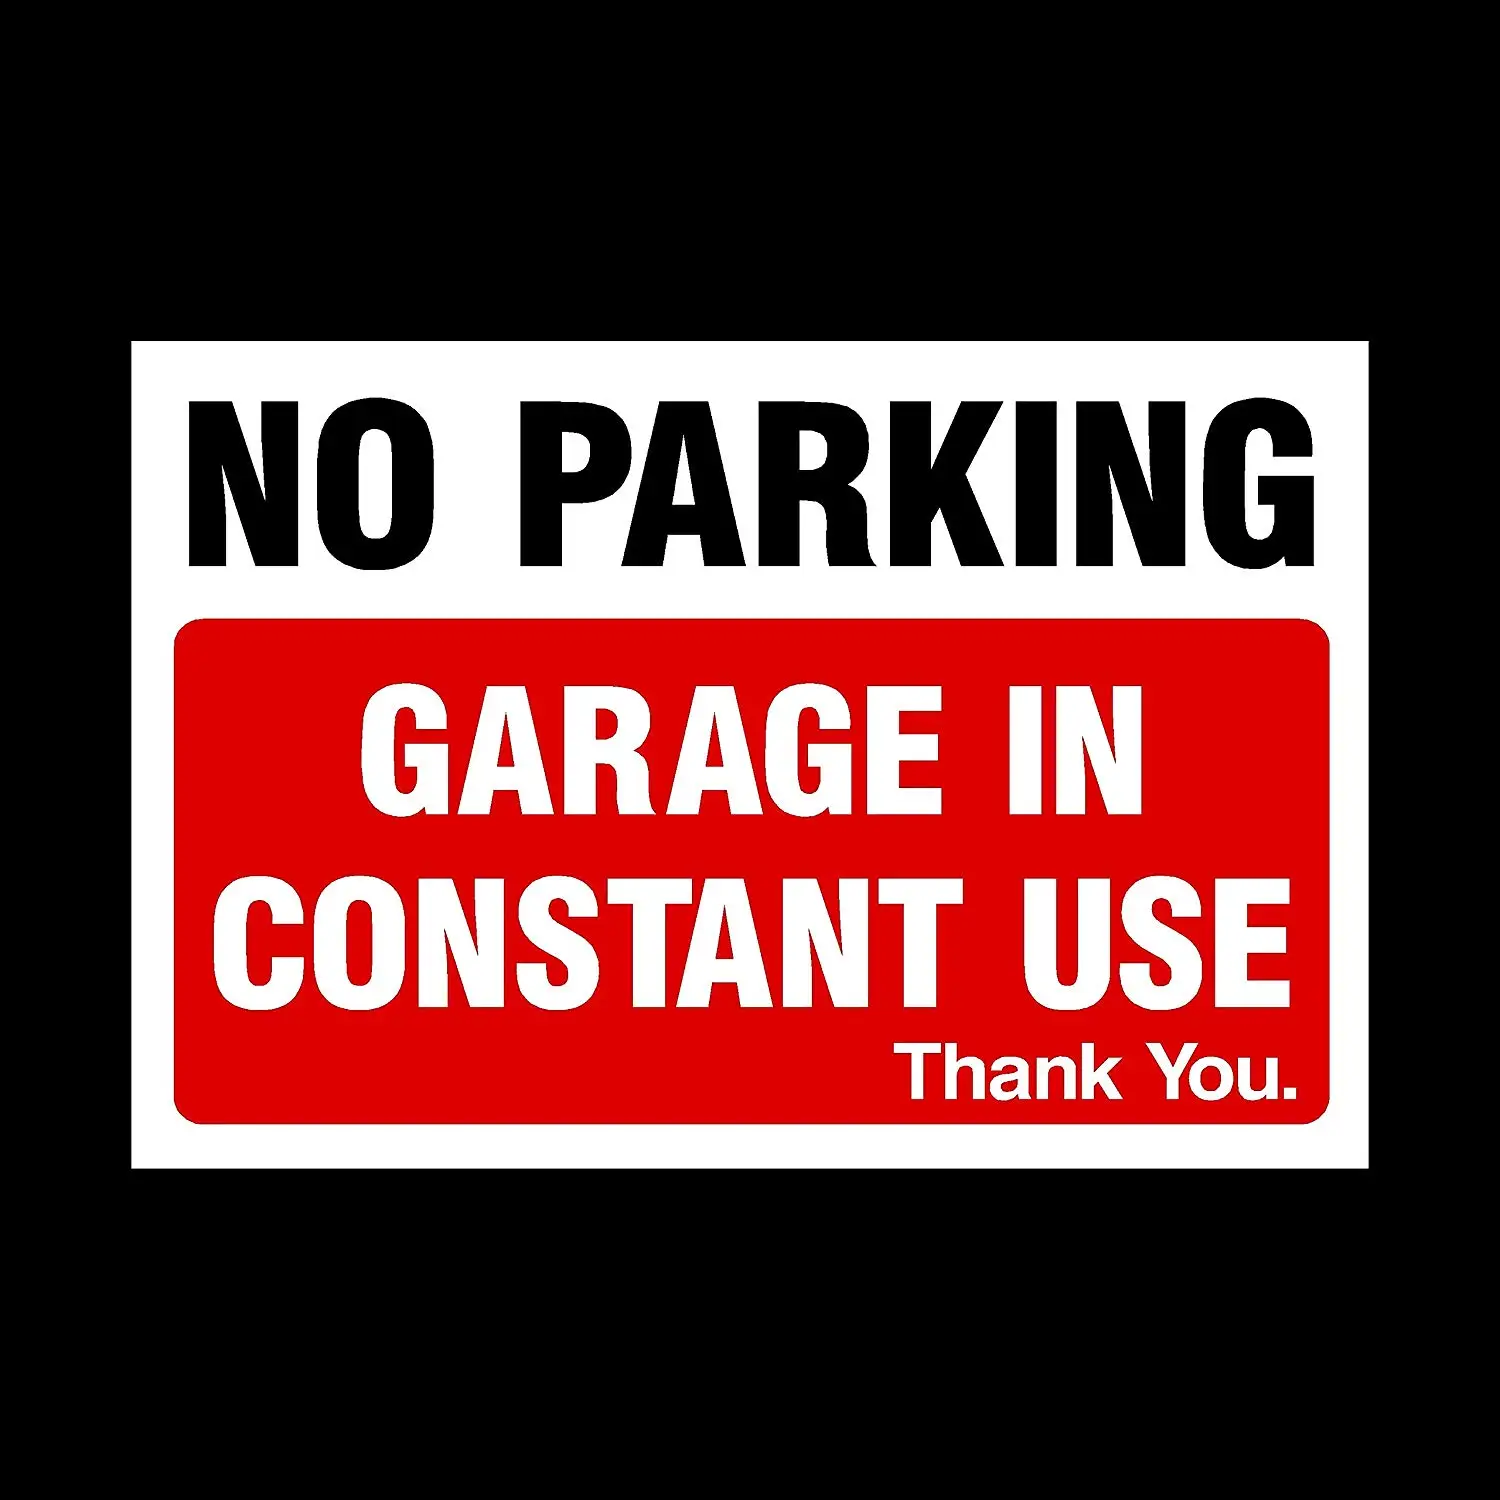 No Parking Keep Clear Private Sign Self adhesive vinyl 300mmx200mm 